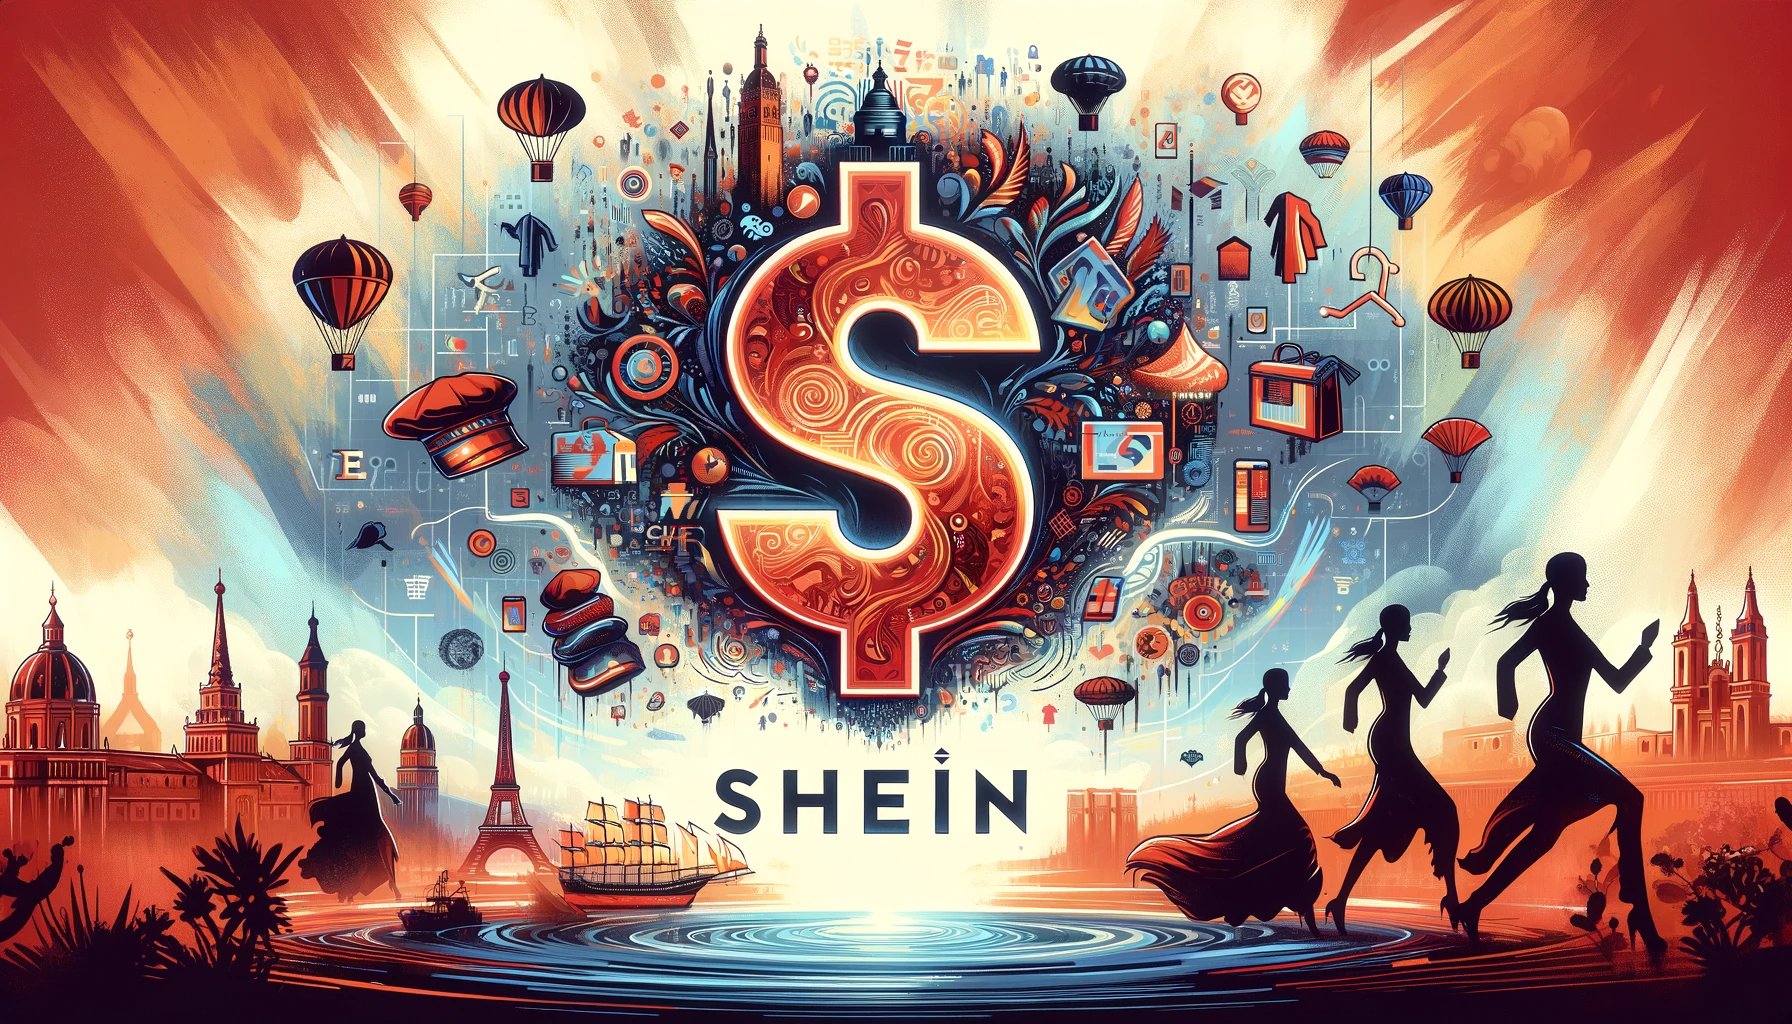 This visual captures the essence of Shein's influence in Spain and its impact on European fashion, blending traditional European symbols with modern and digital motifs.